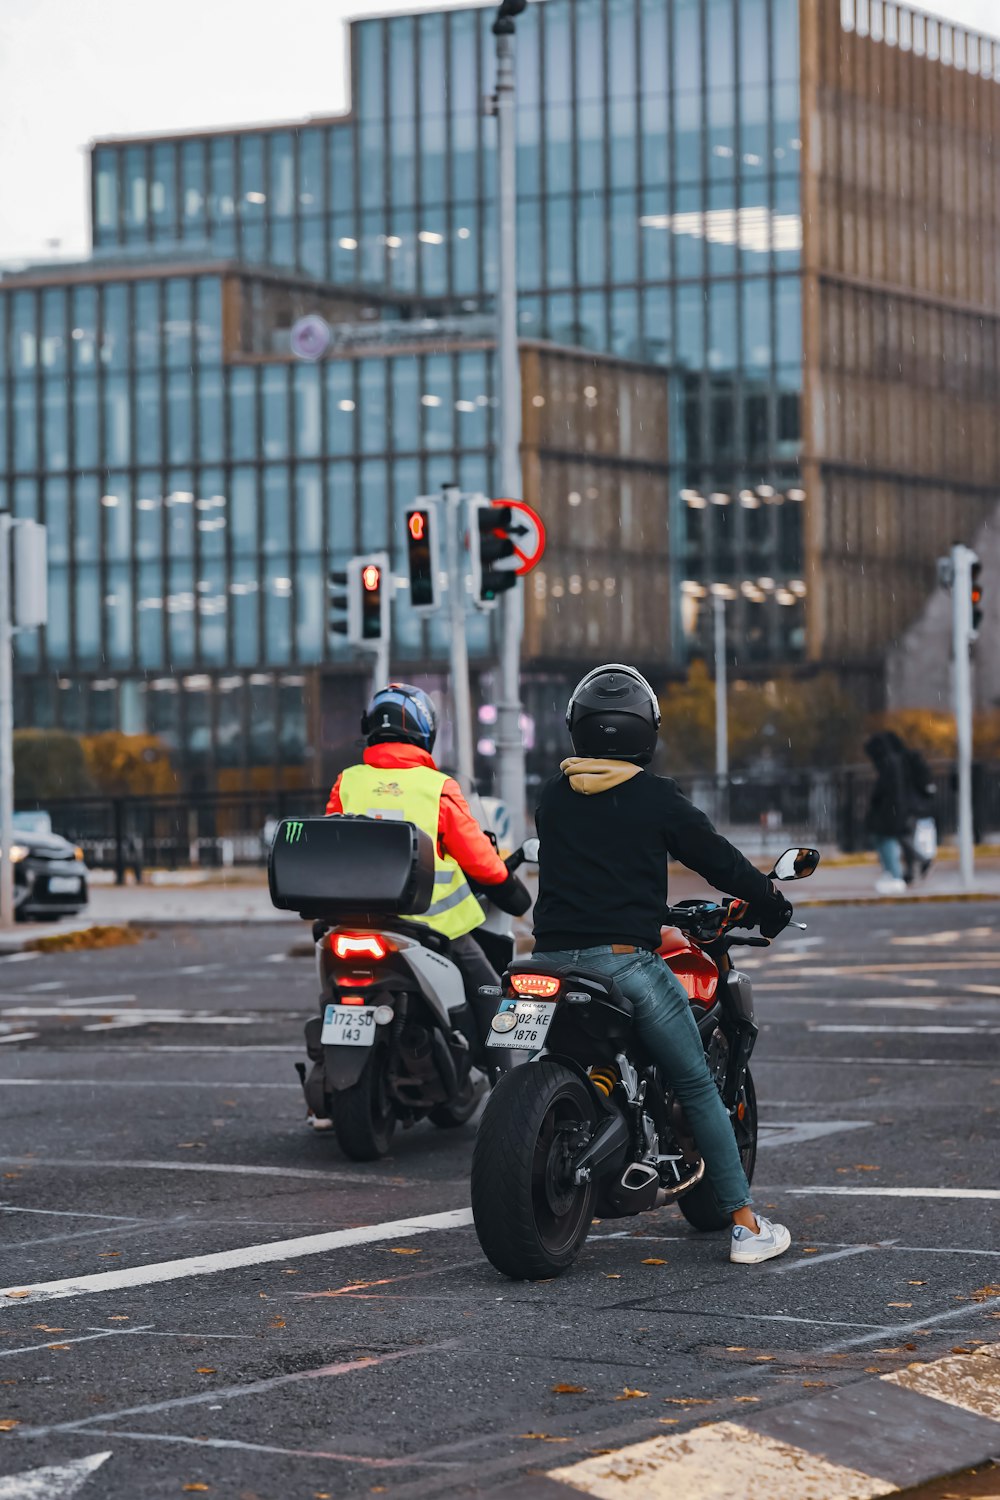 two people riding motorcycles on a city street